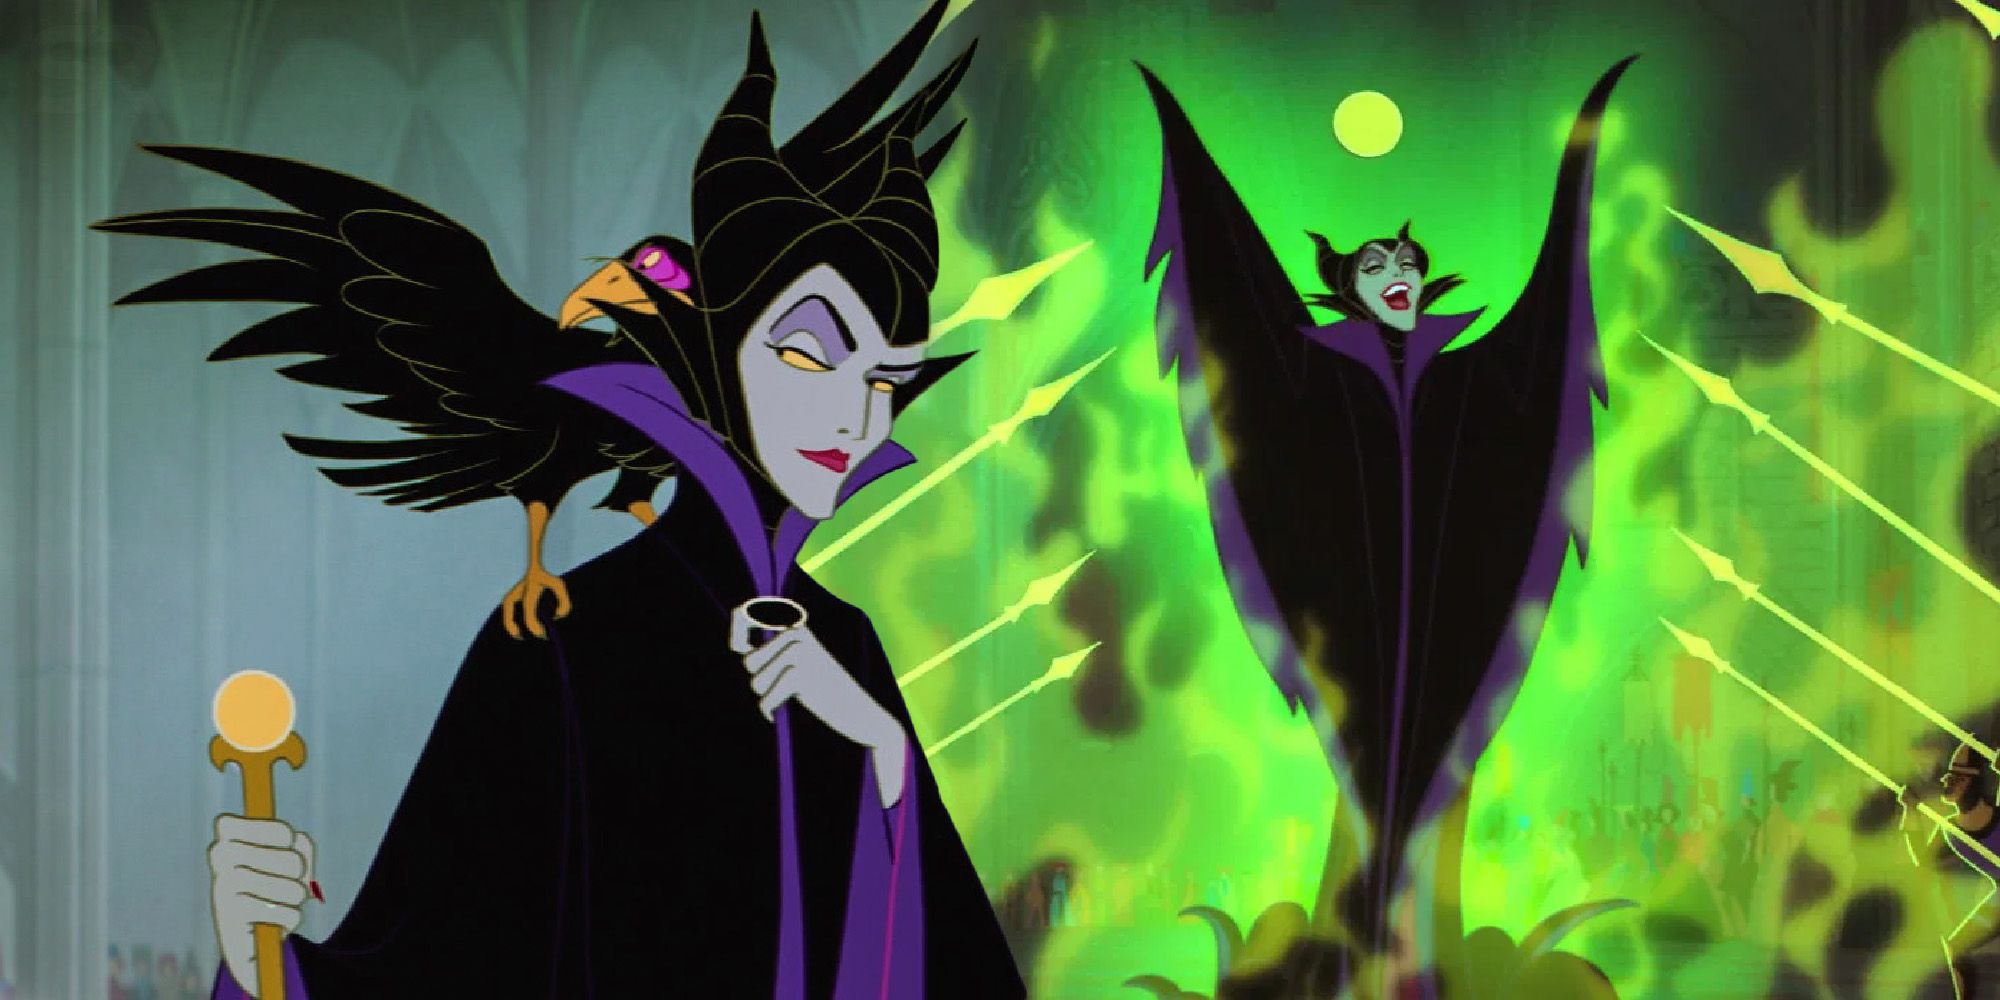 Maleficent displays her powers in Sleeping Beauty